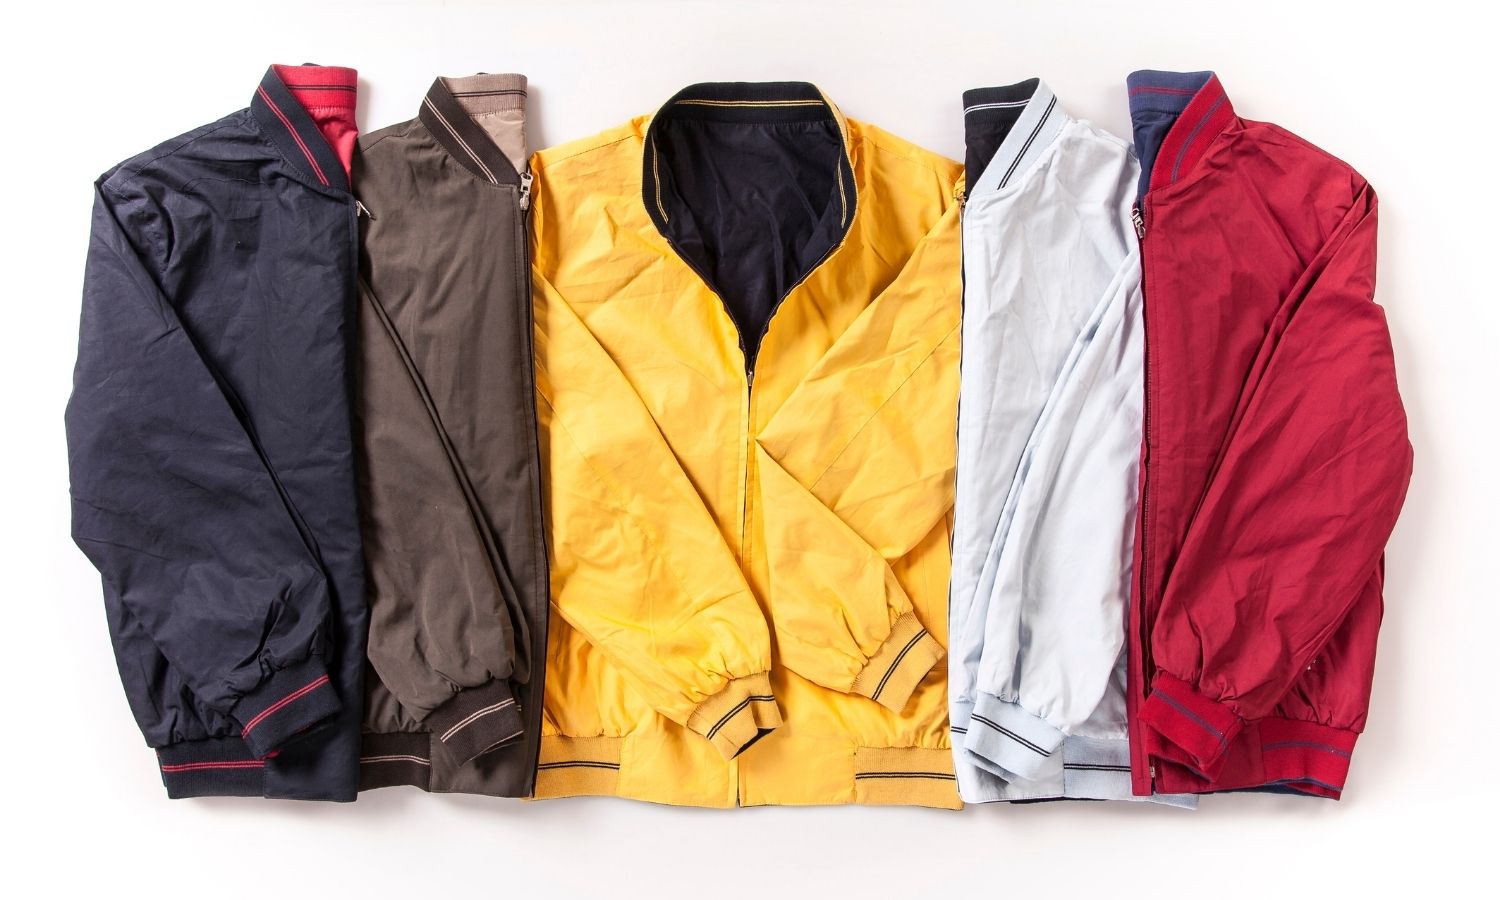 13 Best Jacket Brands to Spice Up Your Outerwear Style